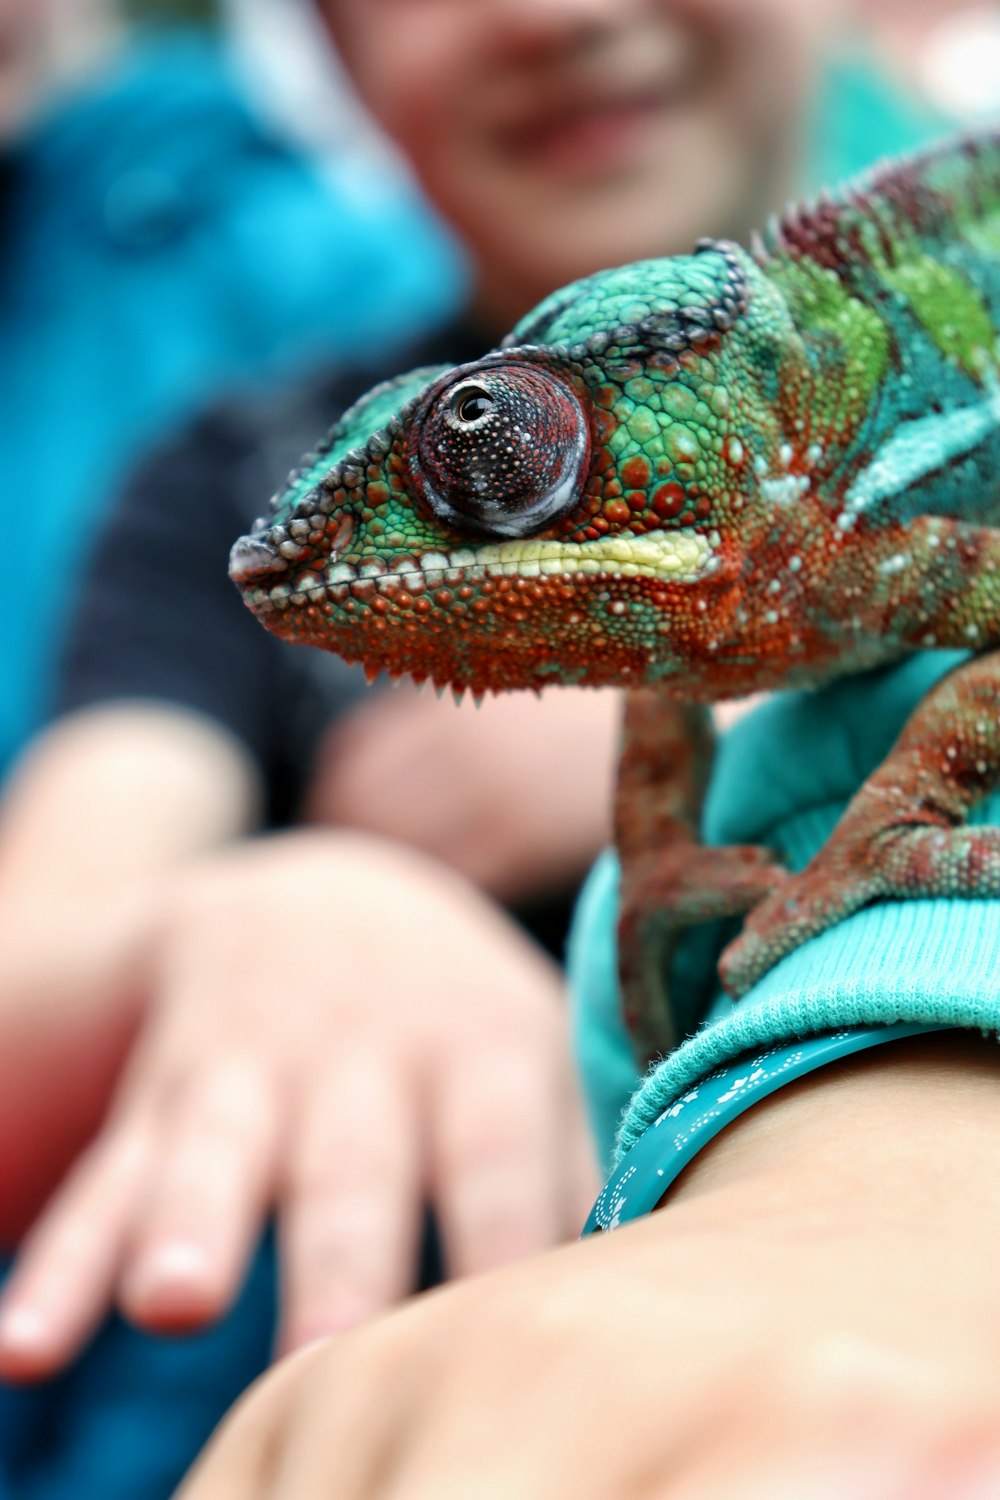 a close up of a lizard on a person's arm